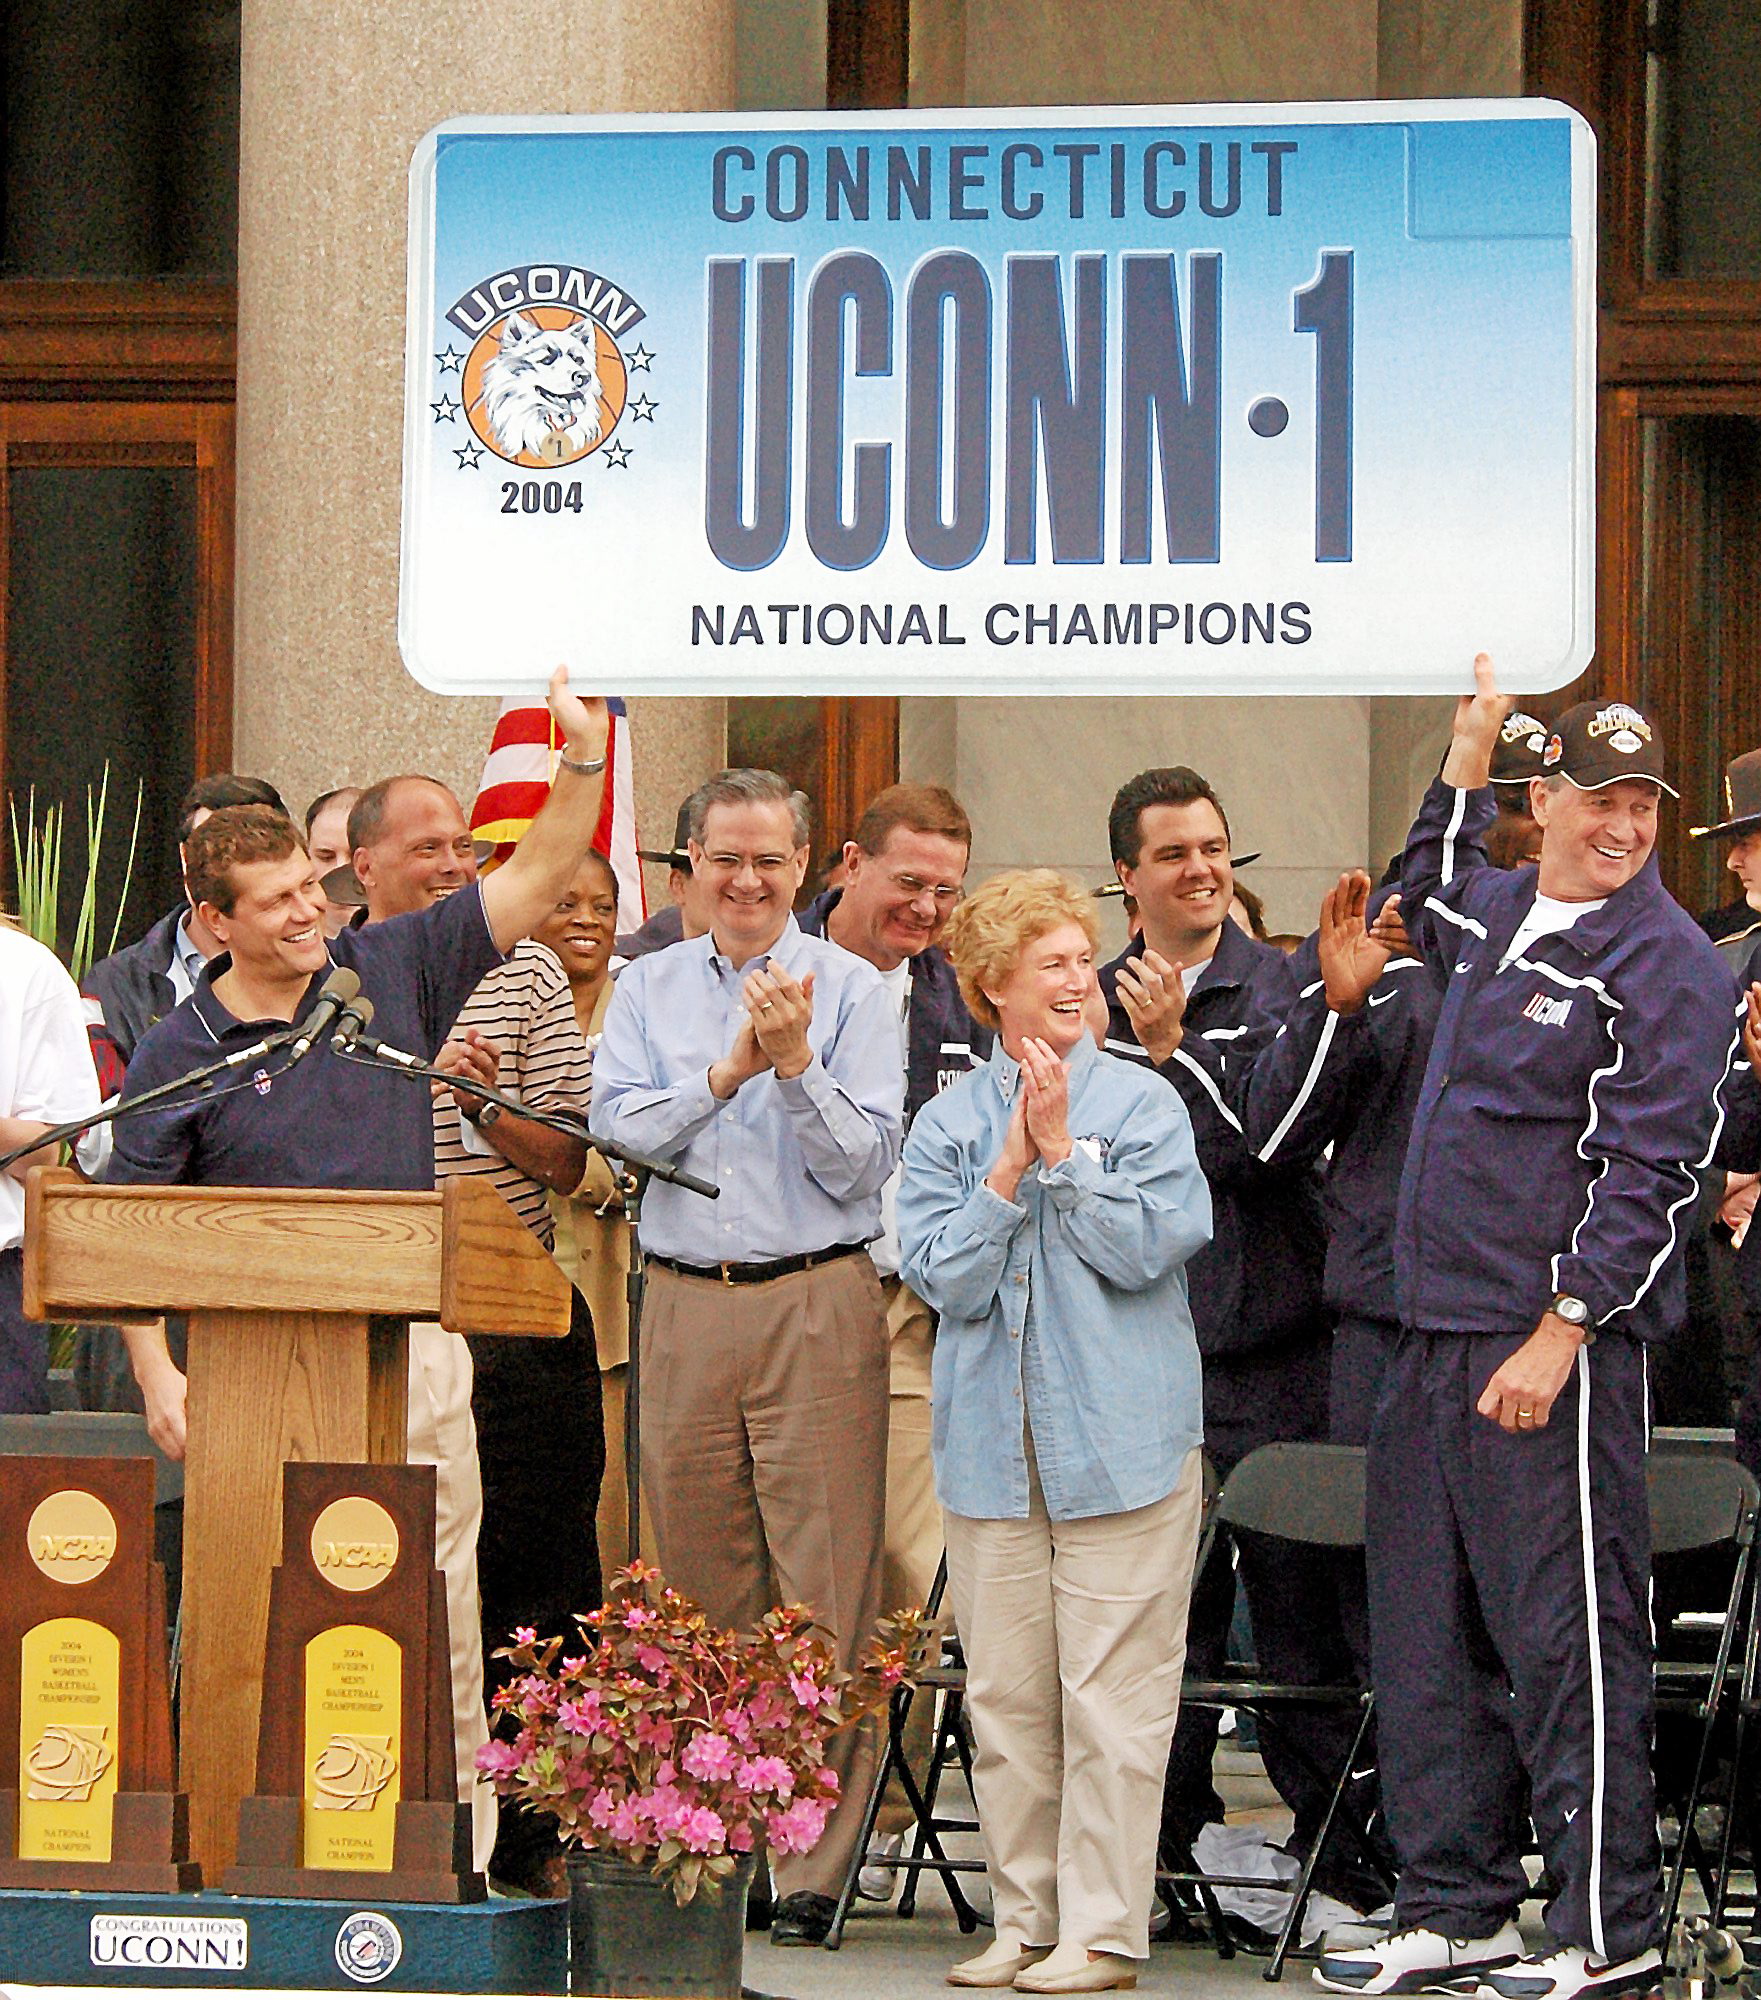 Meet the cast of characters in our 20th anniversary UConn men's